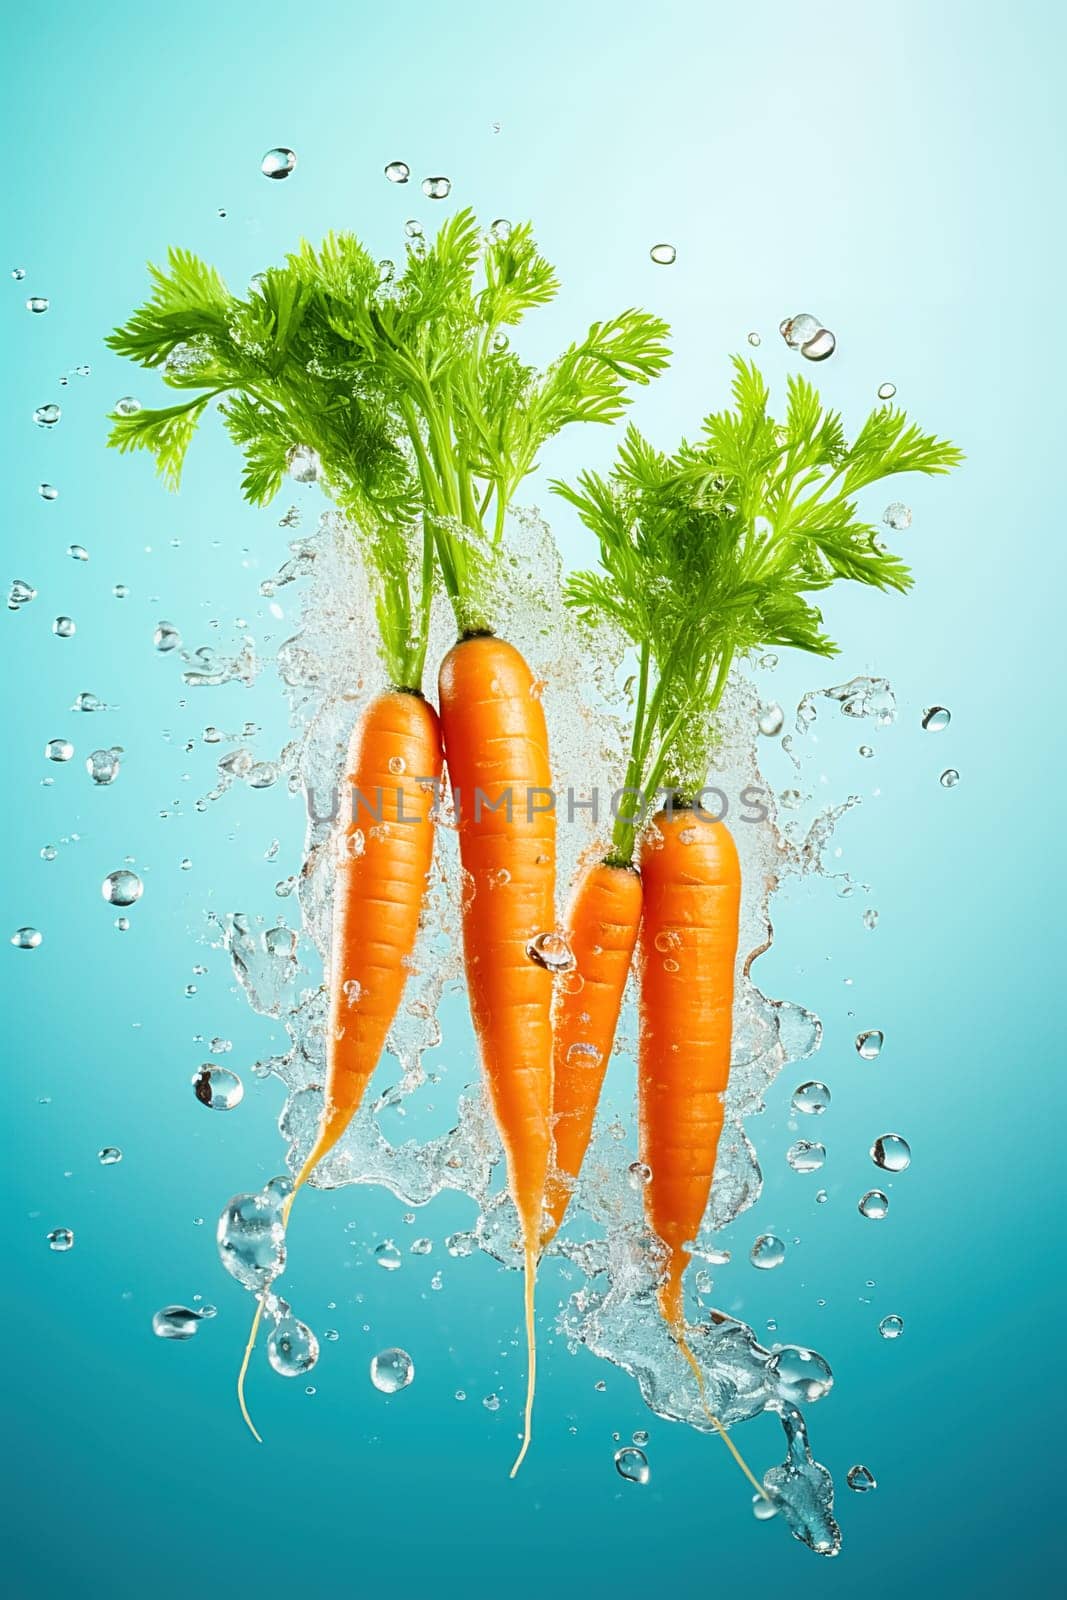 Young carrot with water splash on a blue background. by Yurich32